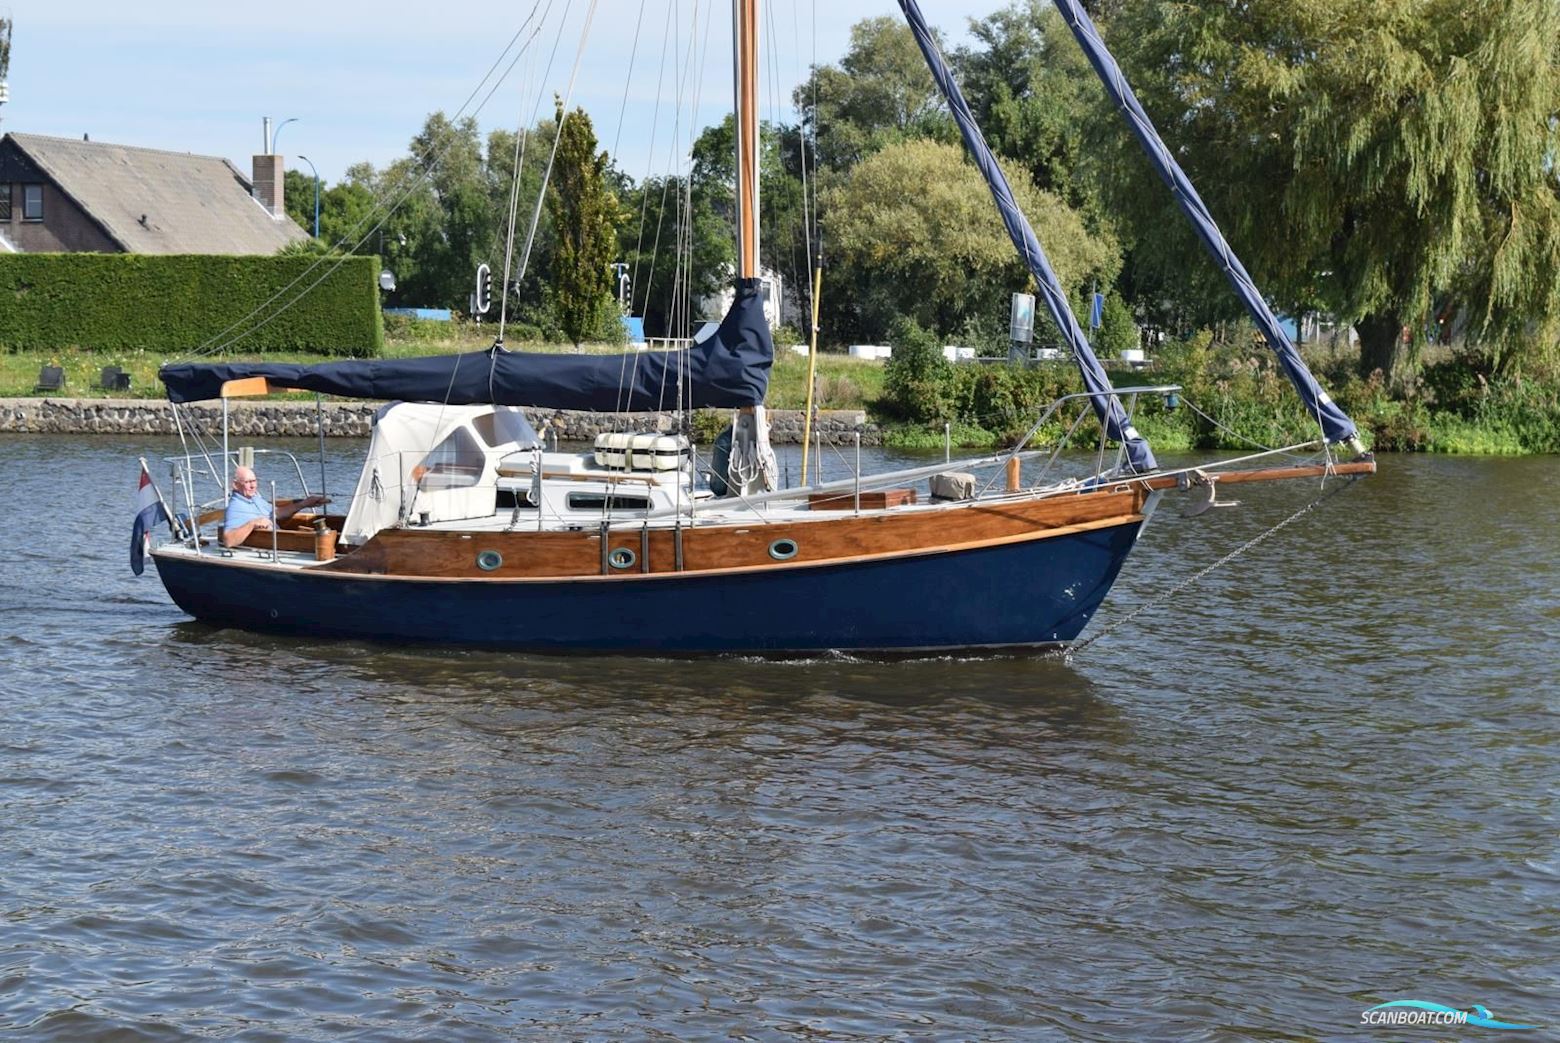 Rossiter Pintail 27 Sailing boat 1976, with Lister Petter engine, The Netherlands